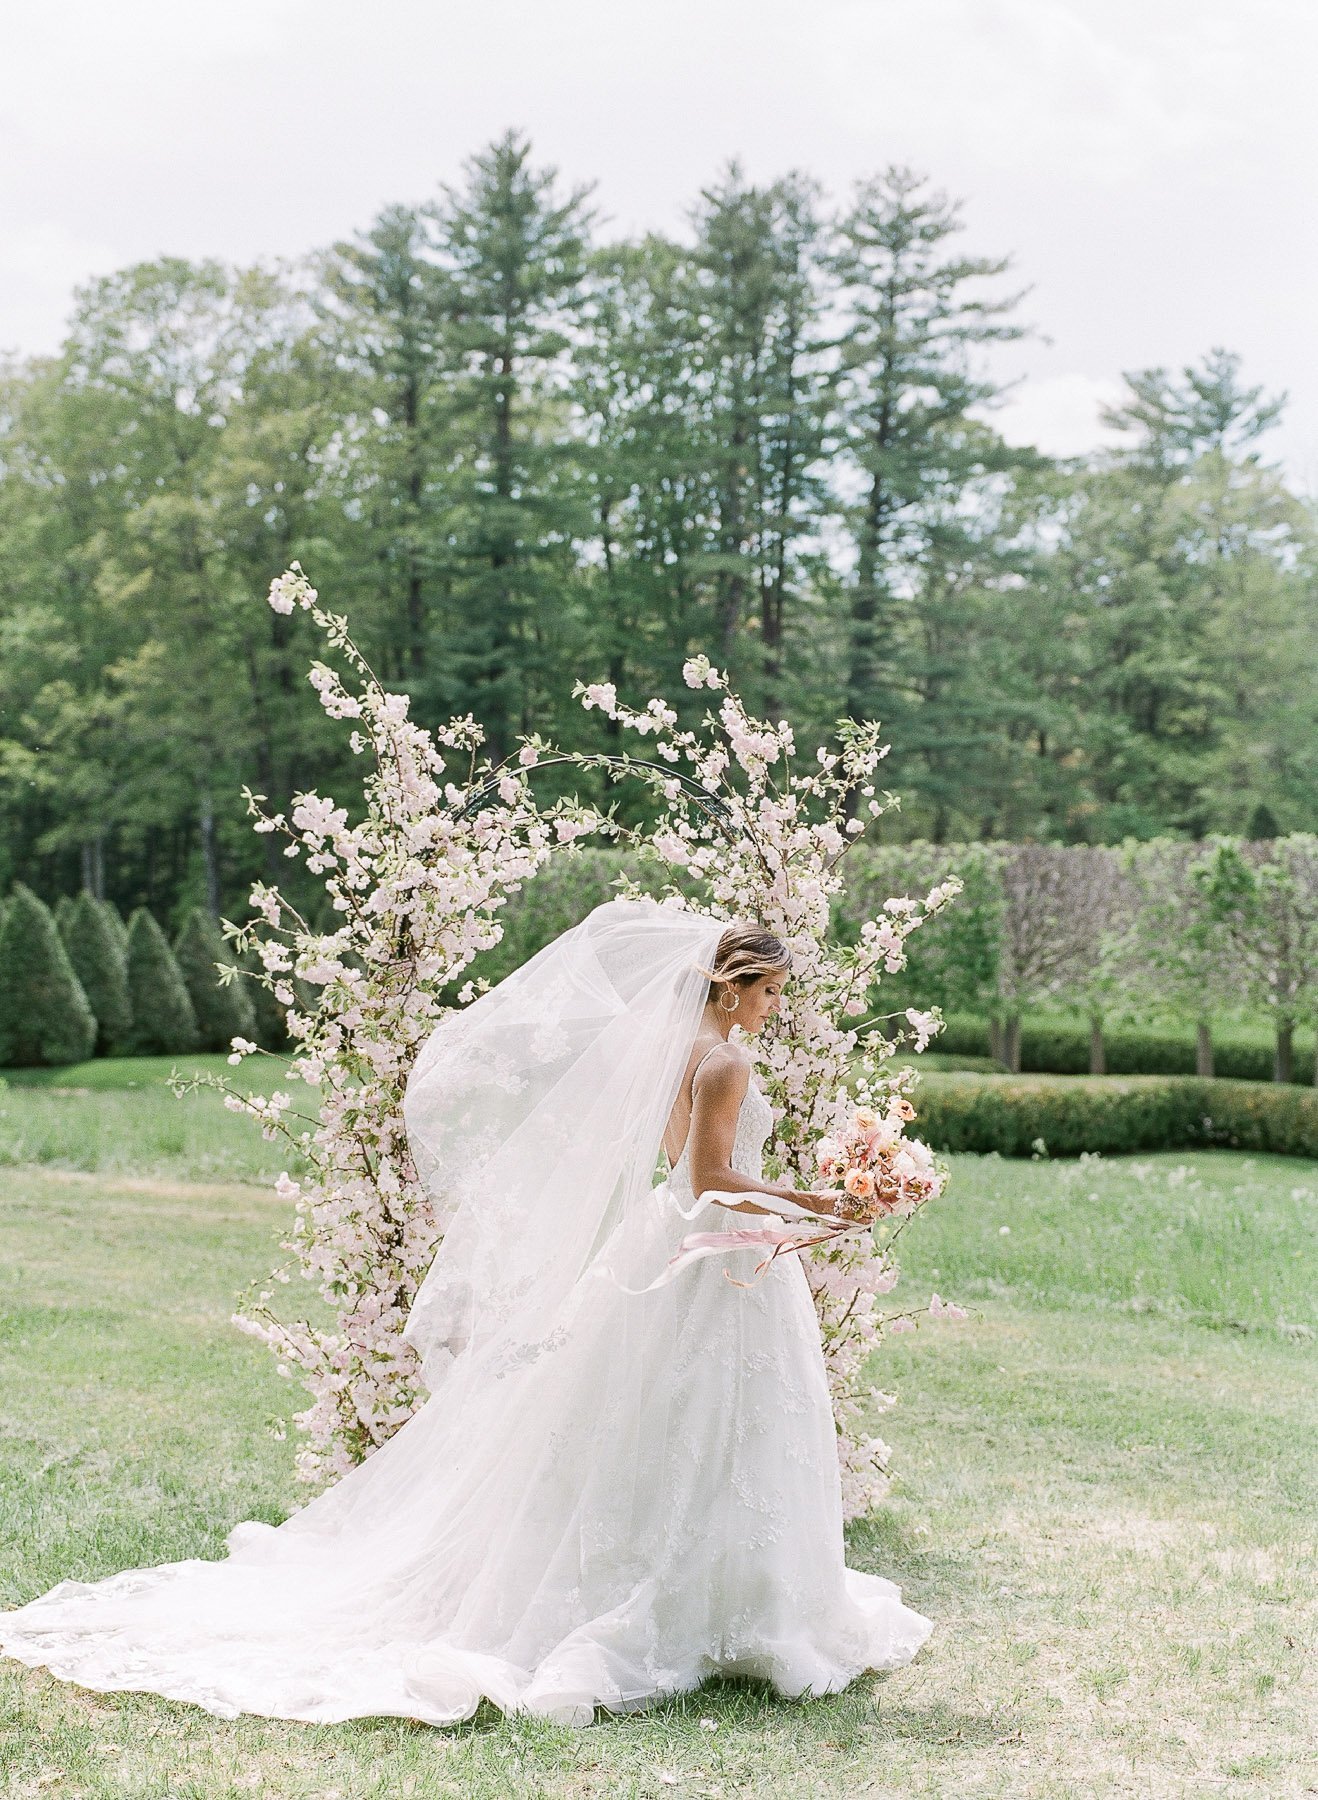 Kelly Strong The Mount Styled Wedding Editorial in Lenox MA by Michelle Lange Photography-73.jpg